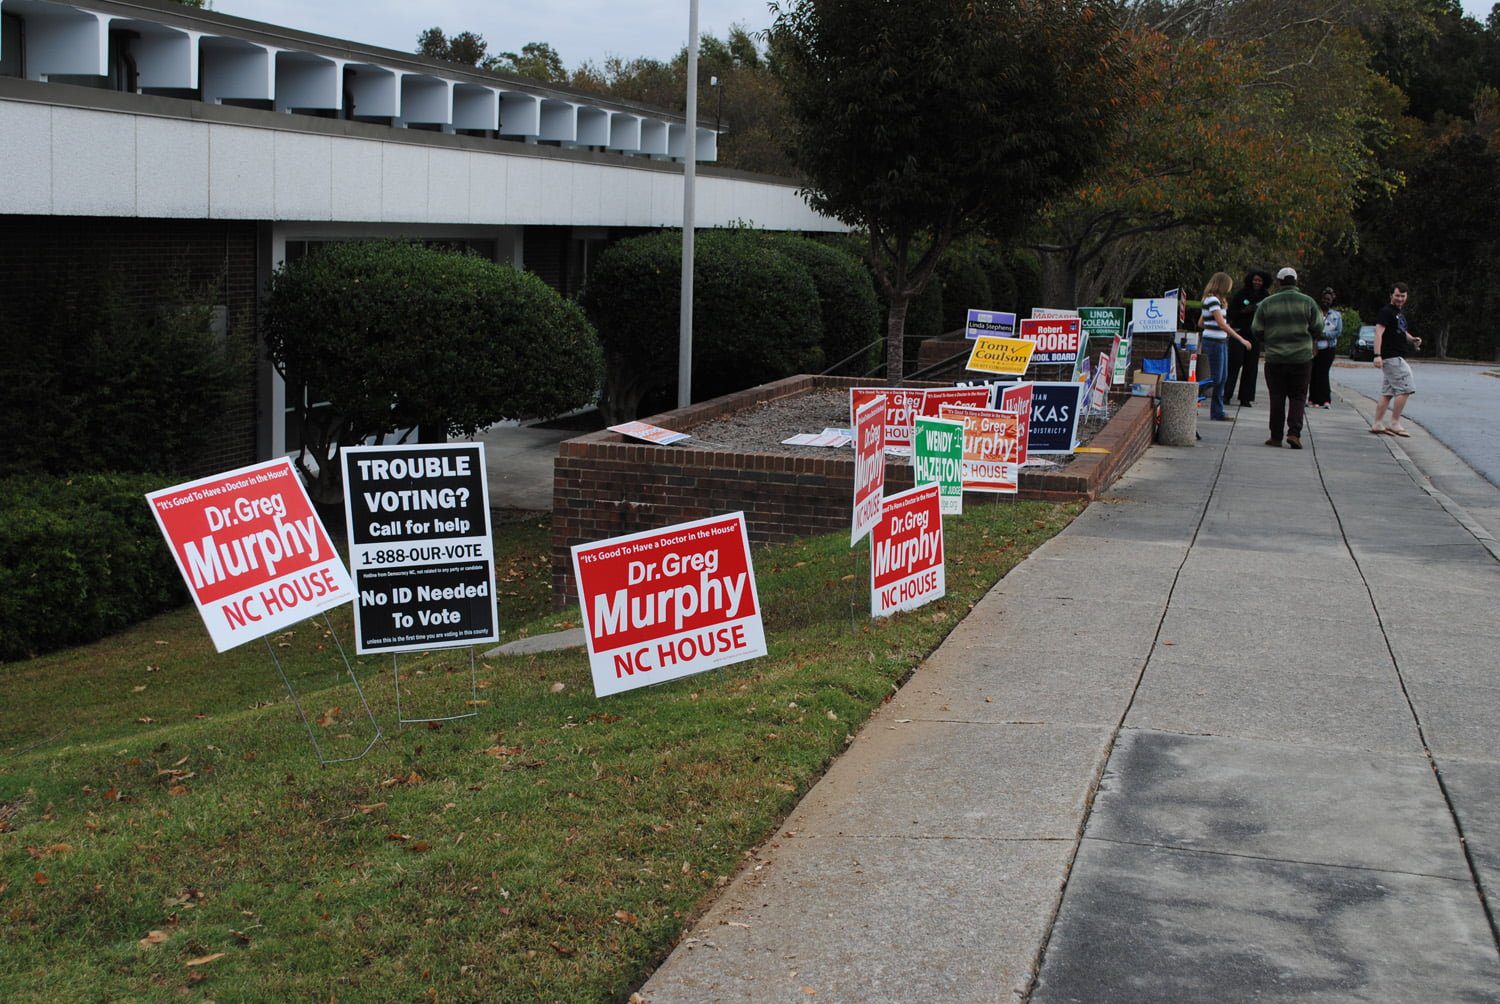 Pitt County reports high turnout and no lines on Election Day The